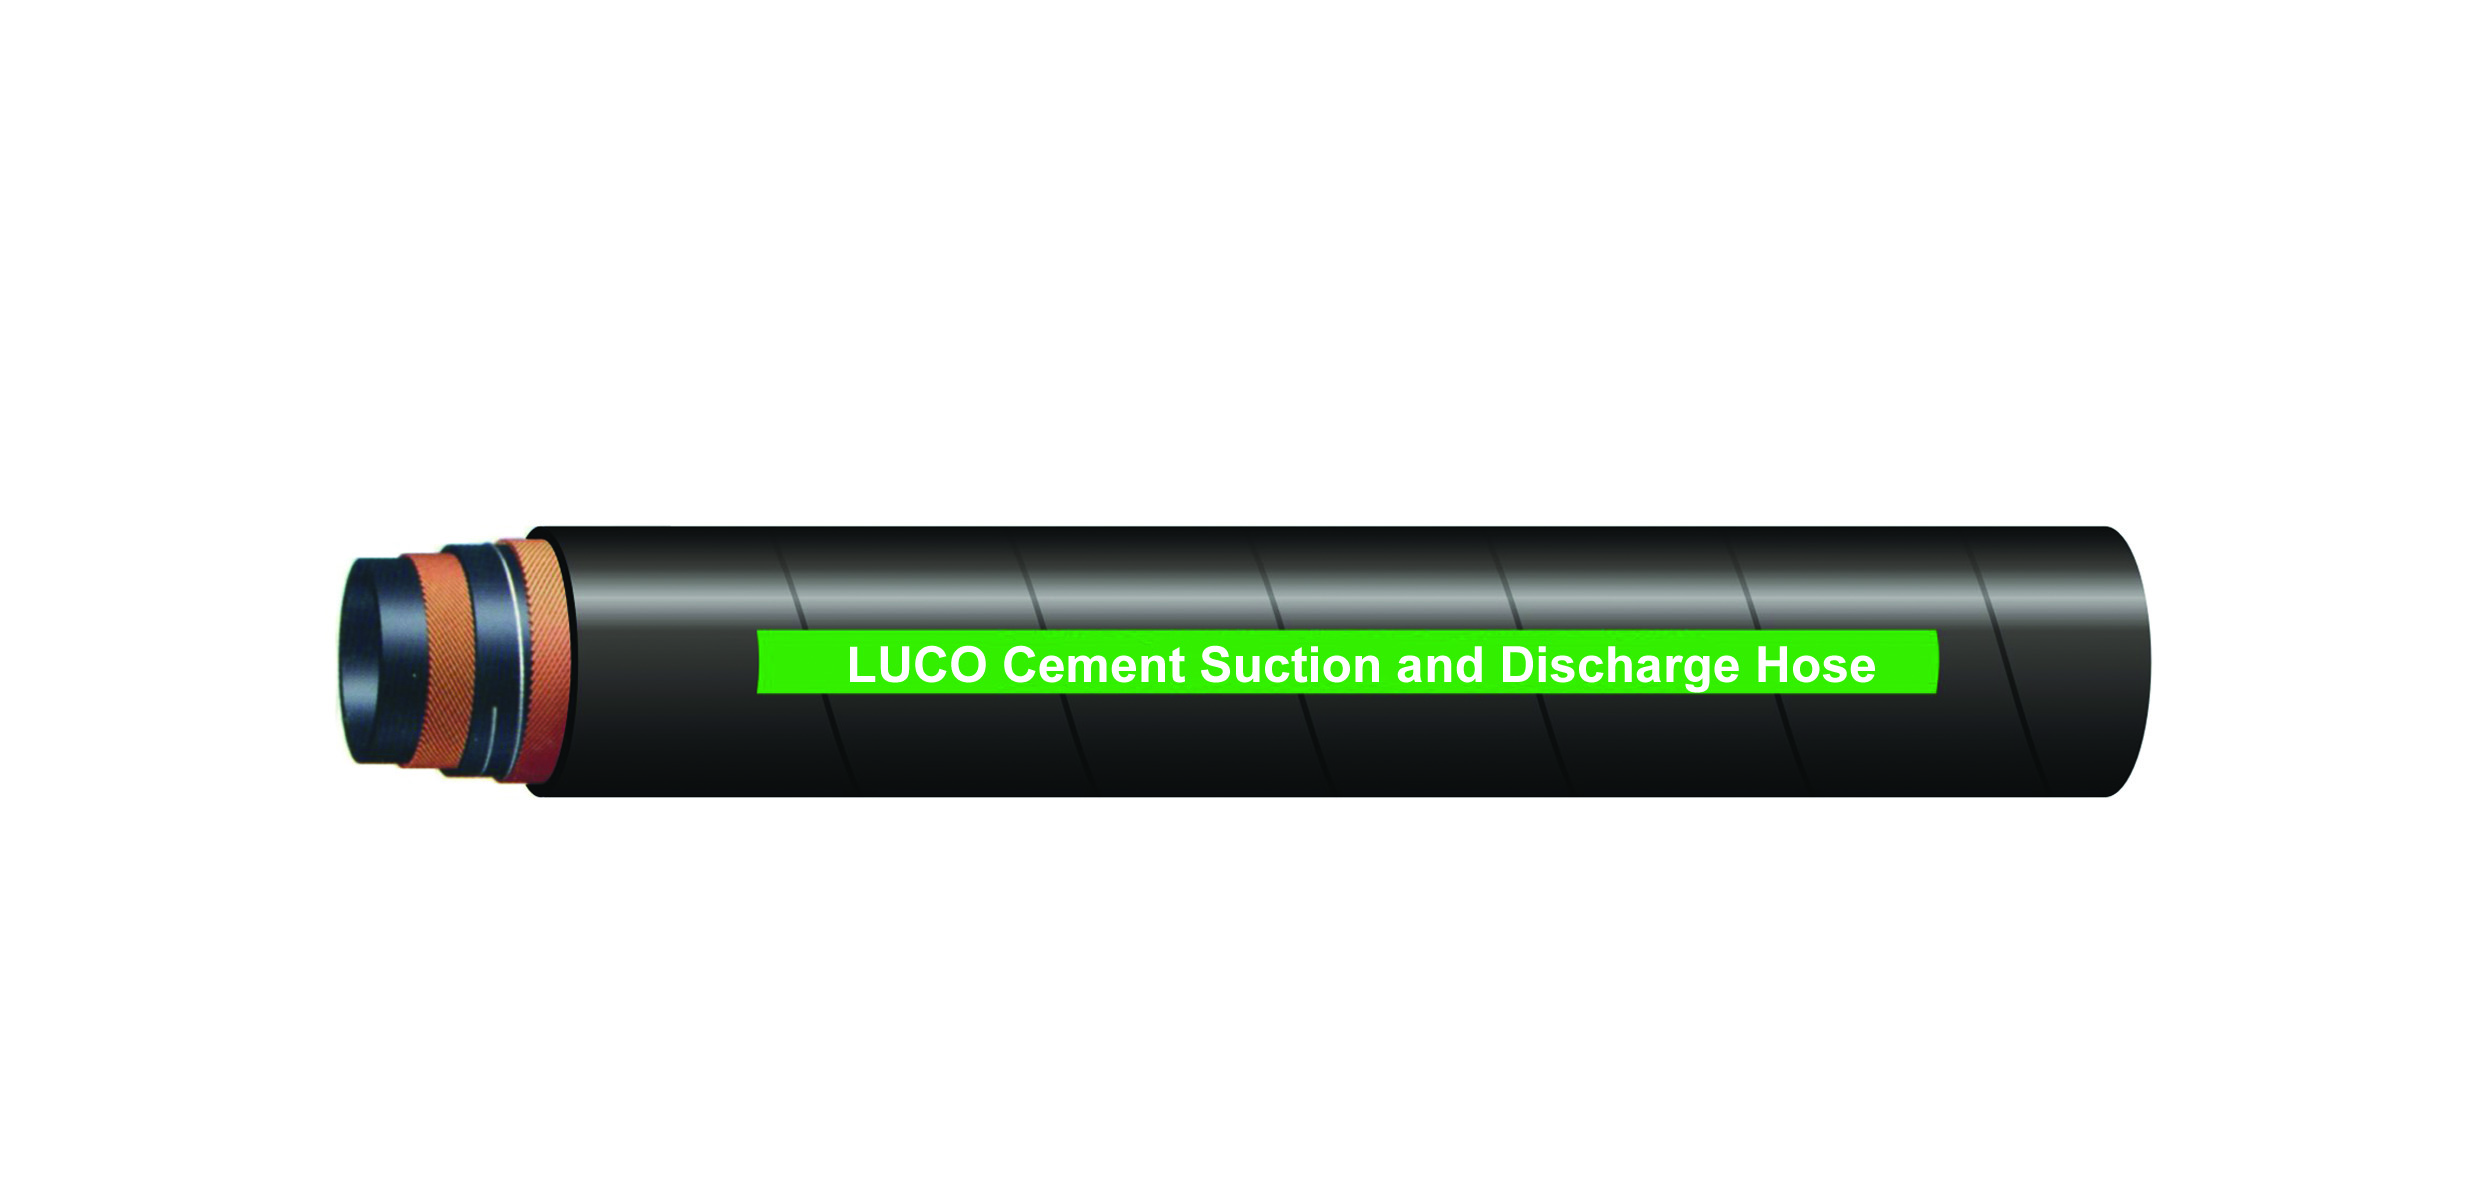 LUCOHOSE Cement Suction and Discharge Hose